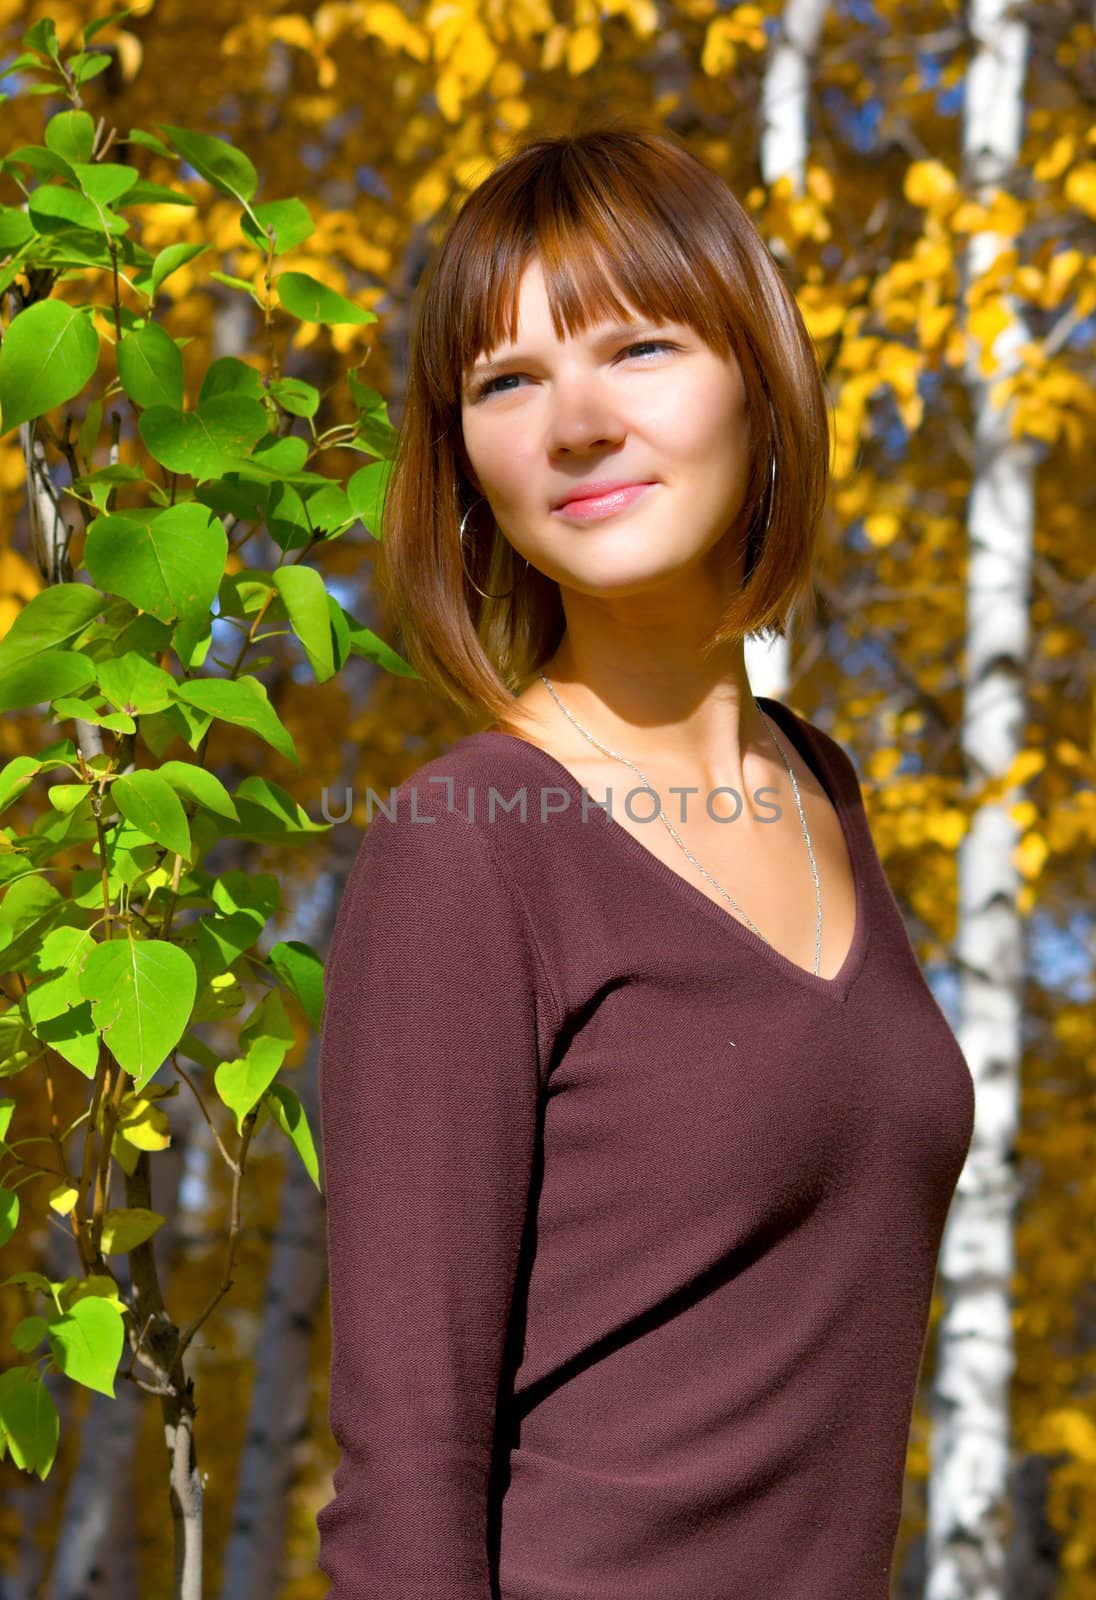 Portrait of the beautiful young girl against green foliage